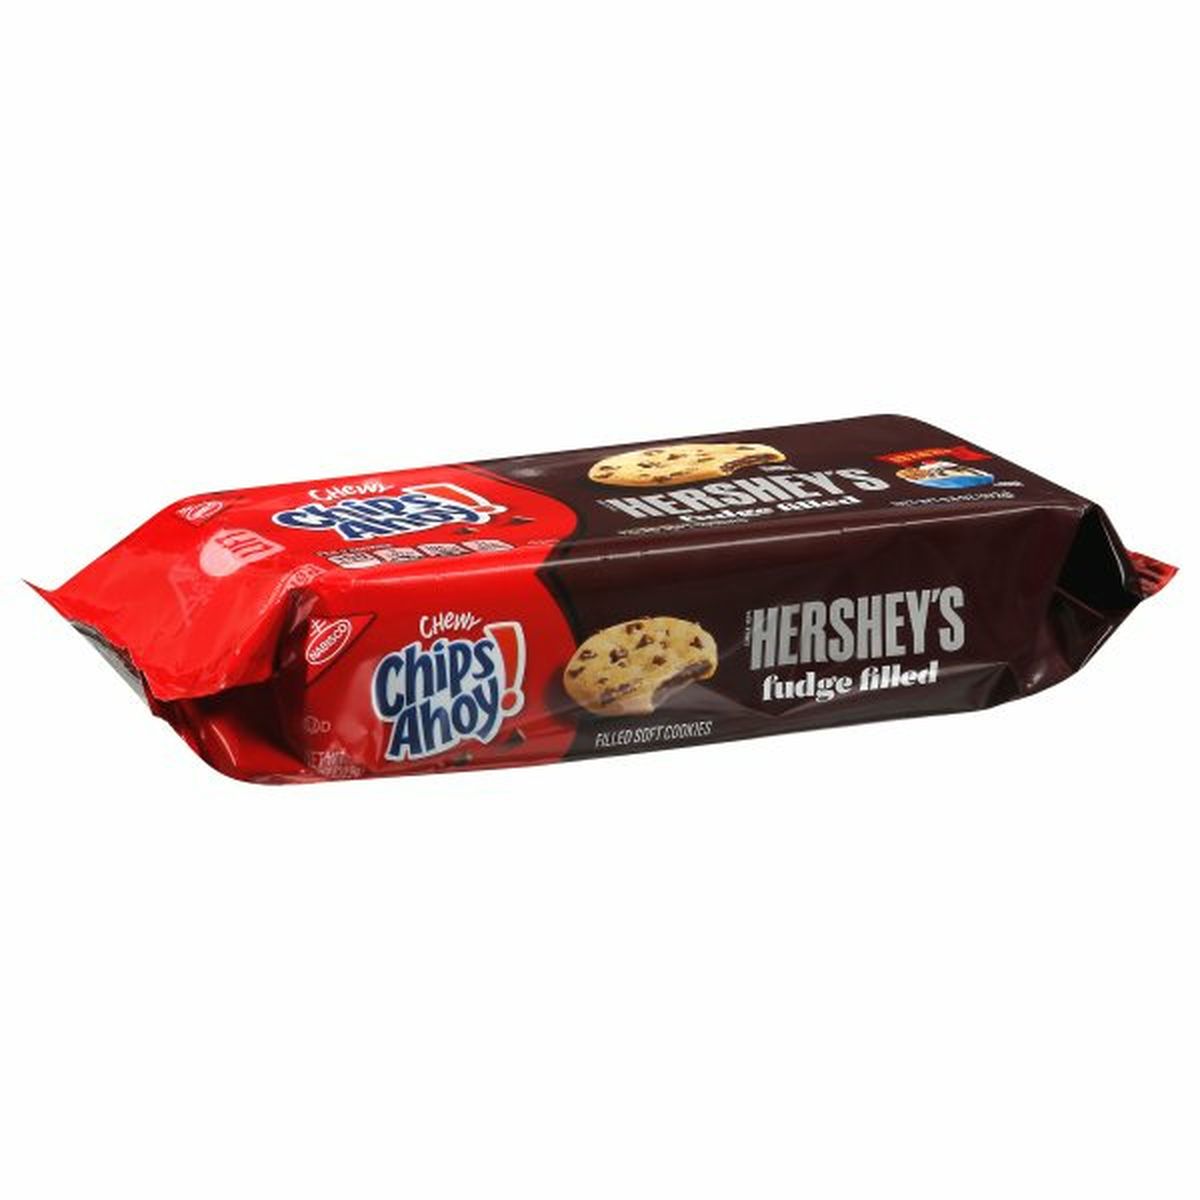 Calories in Chips Ahoy! Soft Cookies, Hershey's, Fudge Filled, Chewy